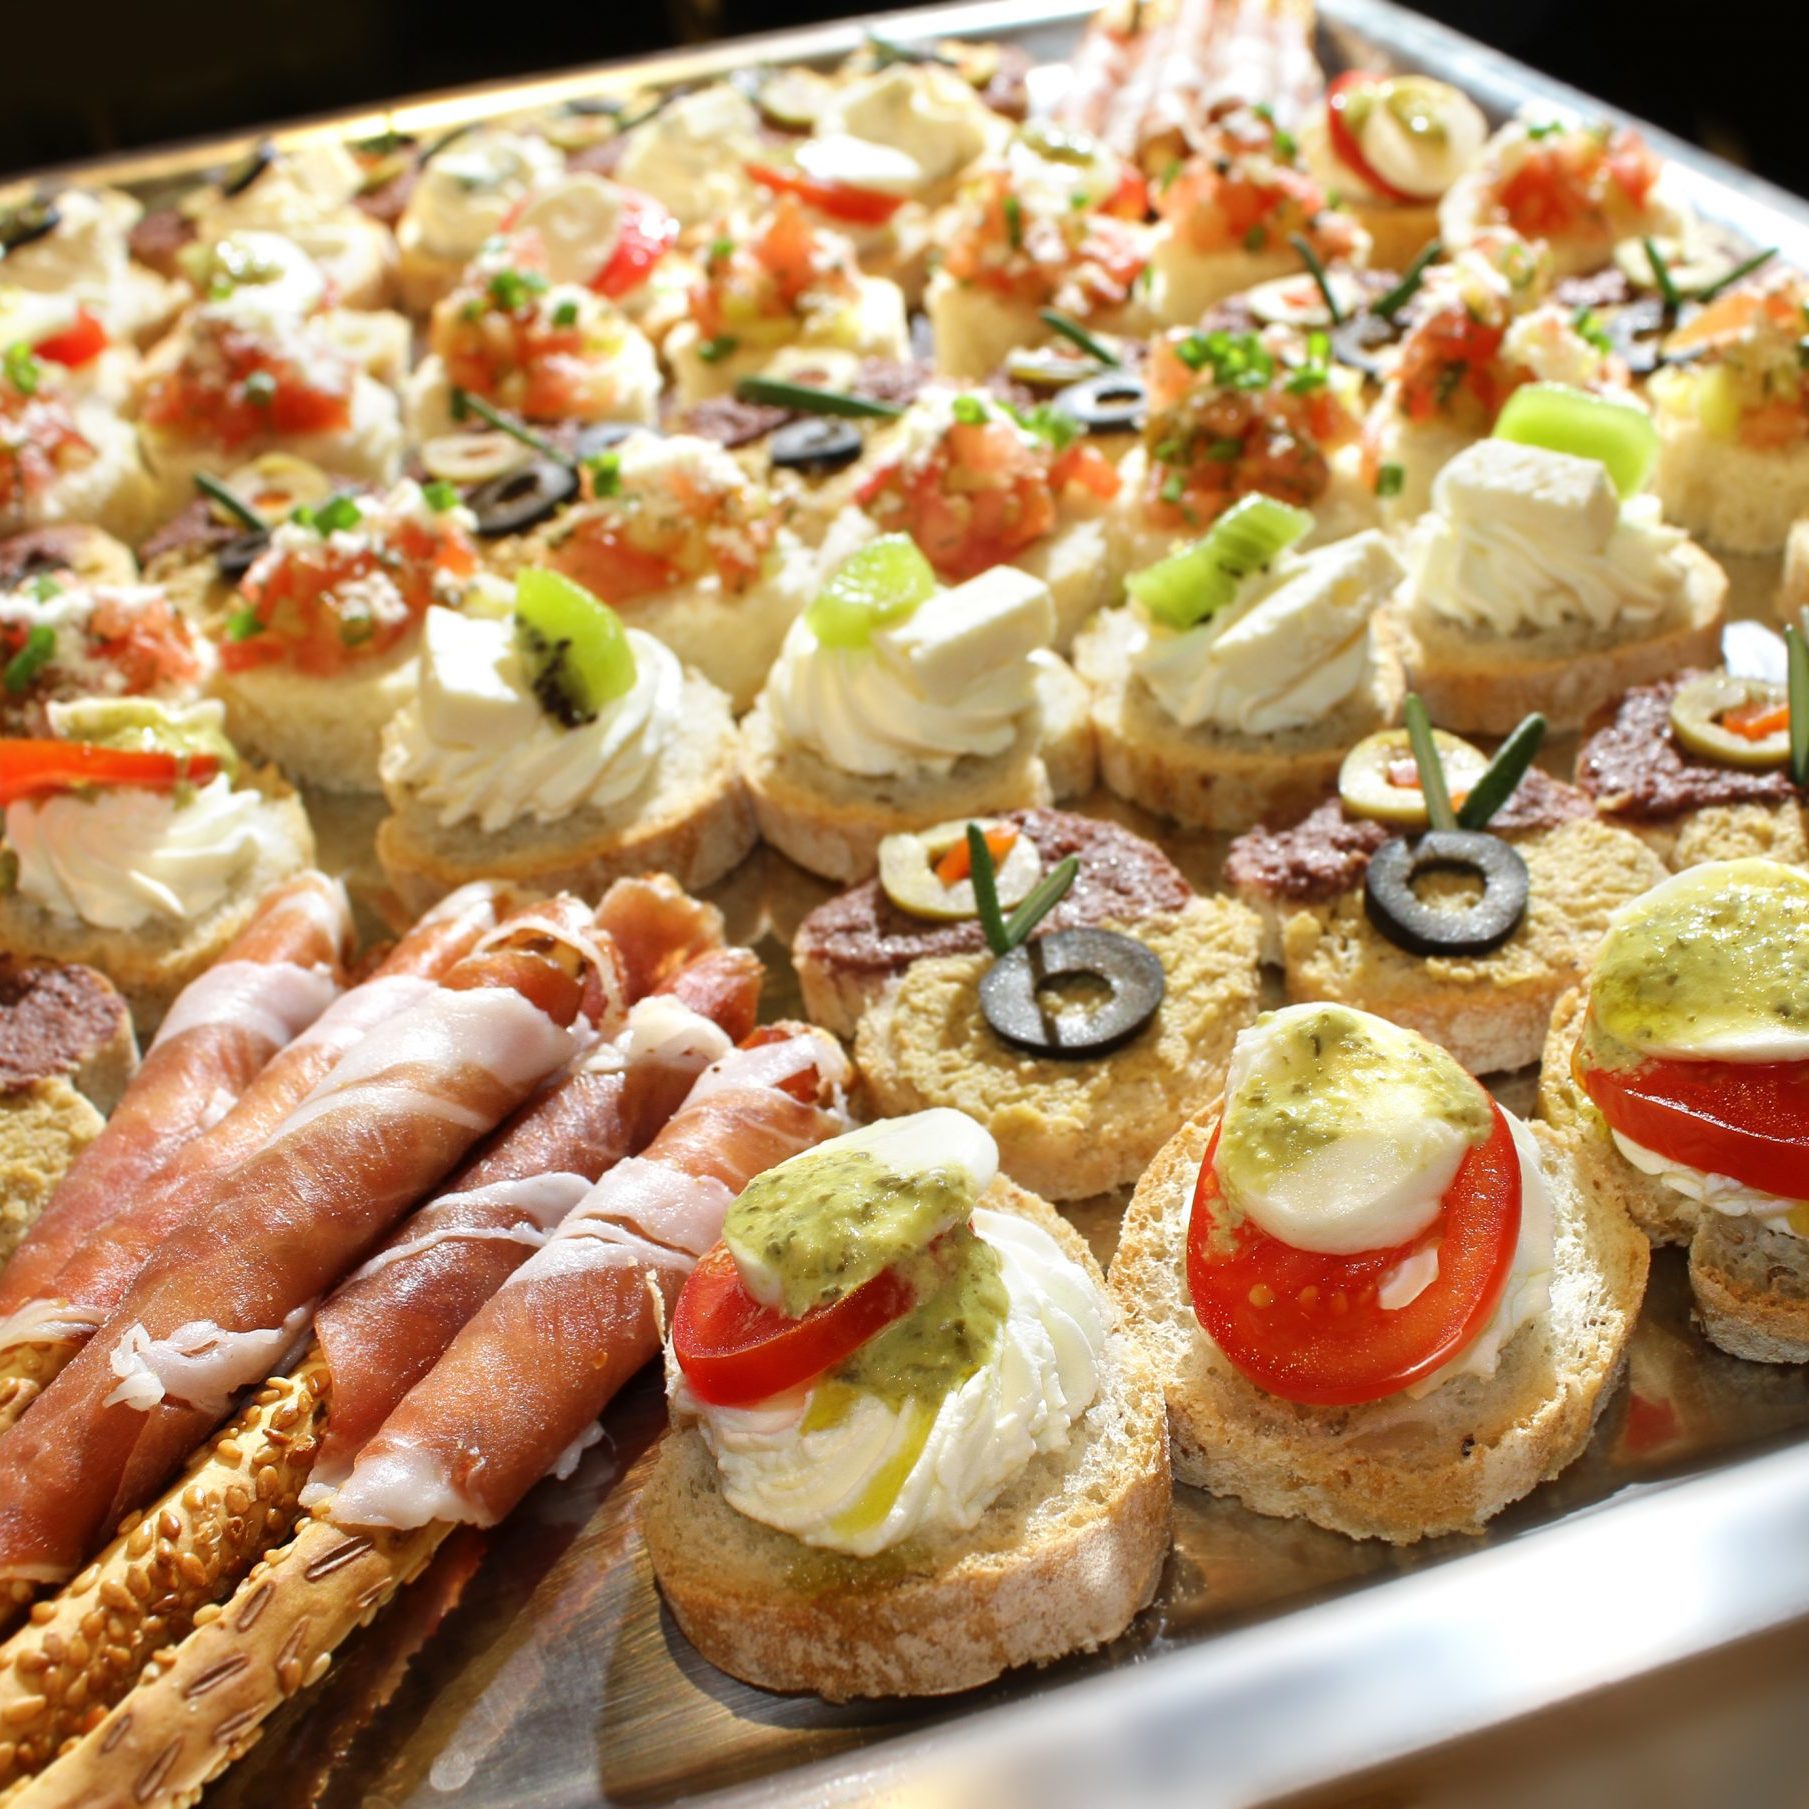 Variety of finger food on catering event. Shalloe focus